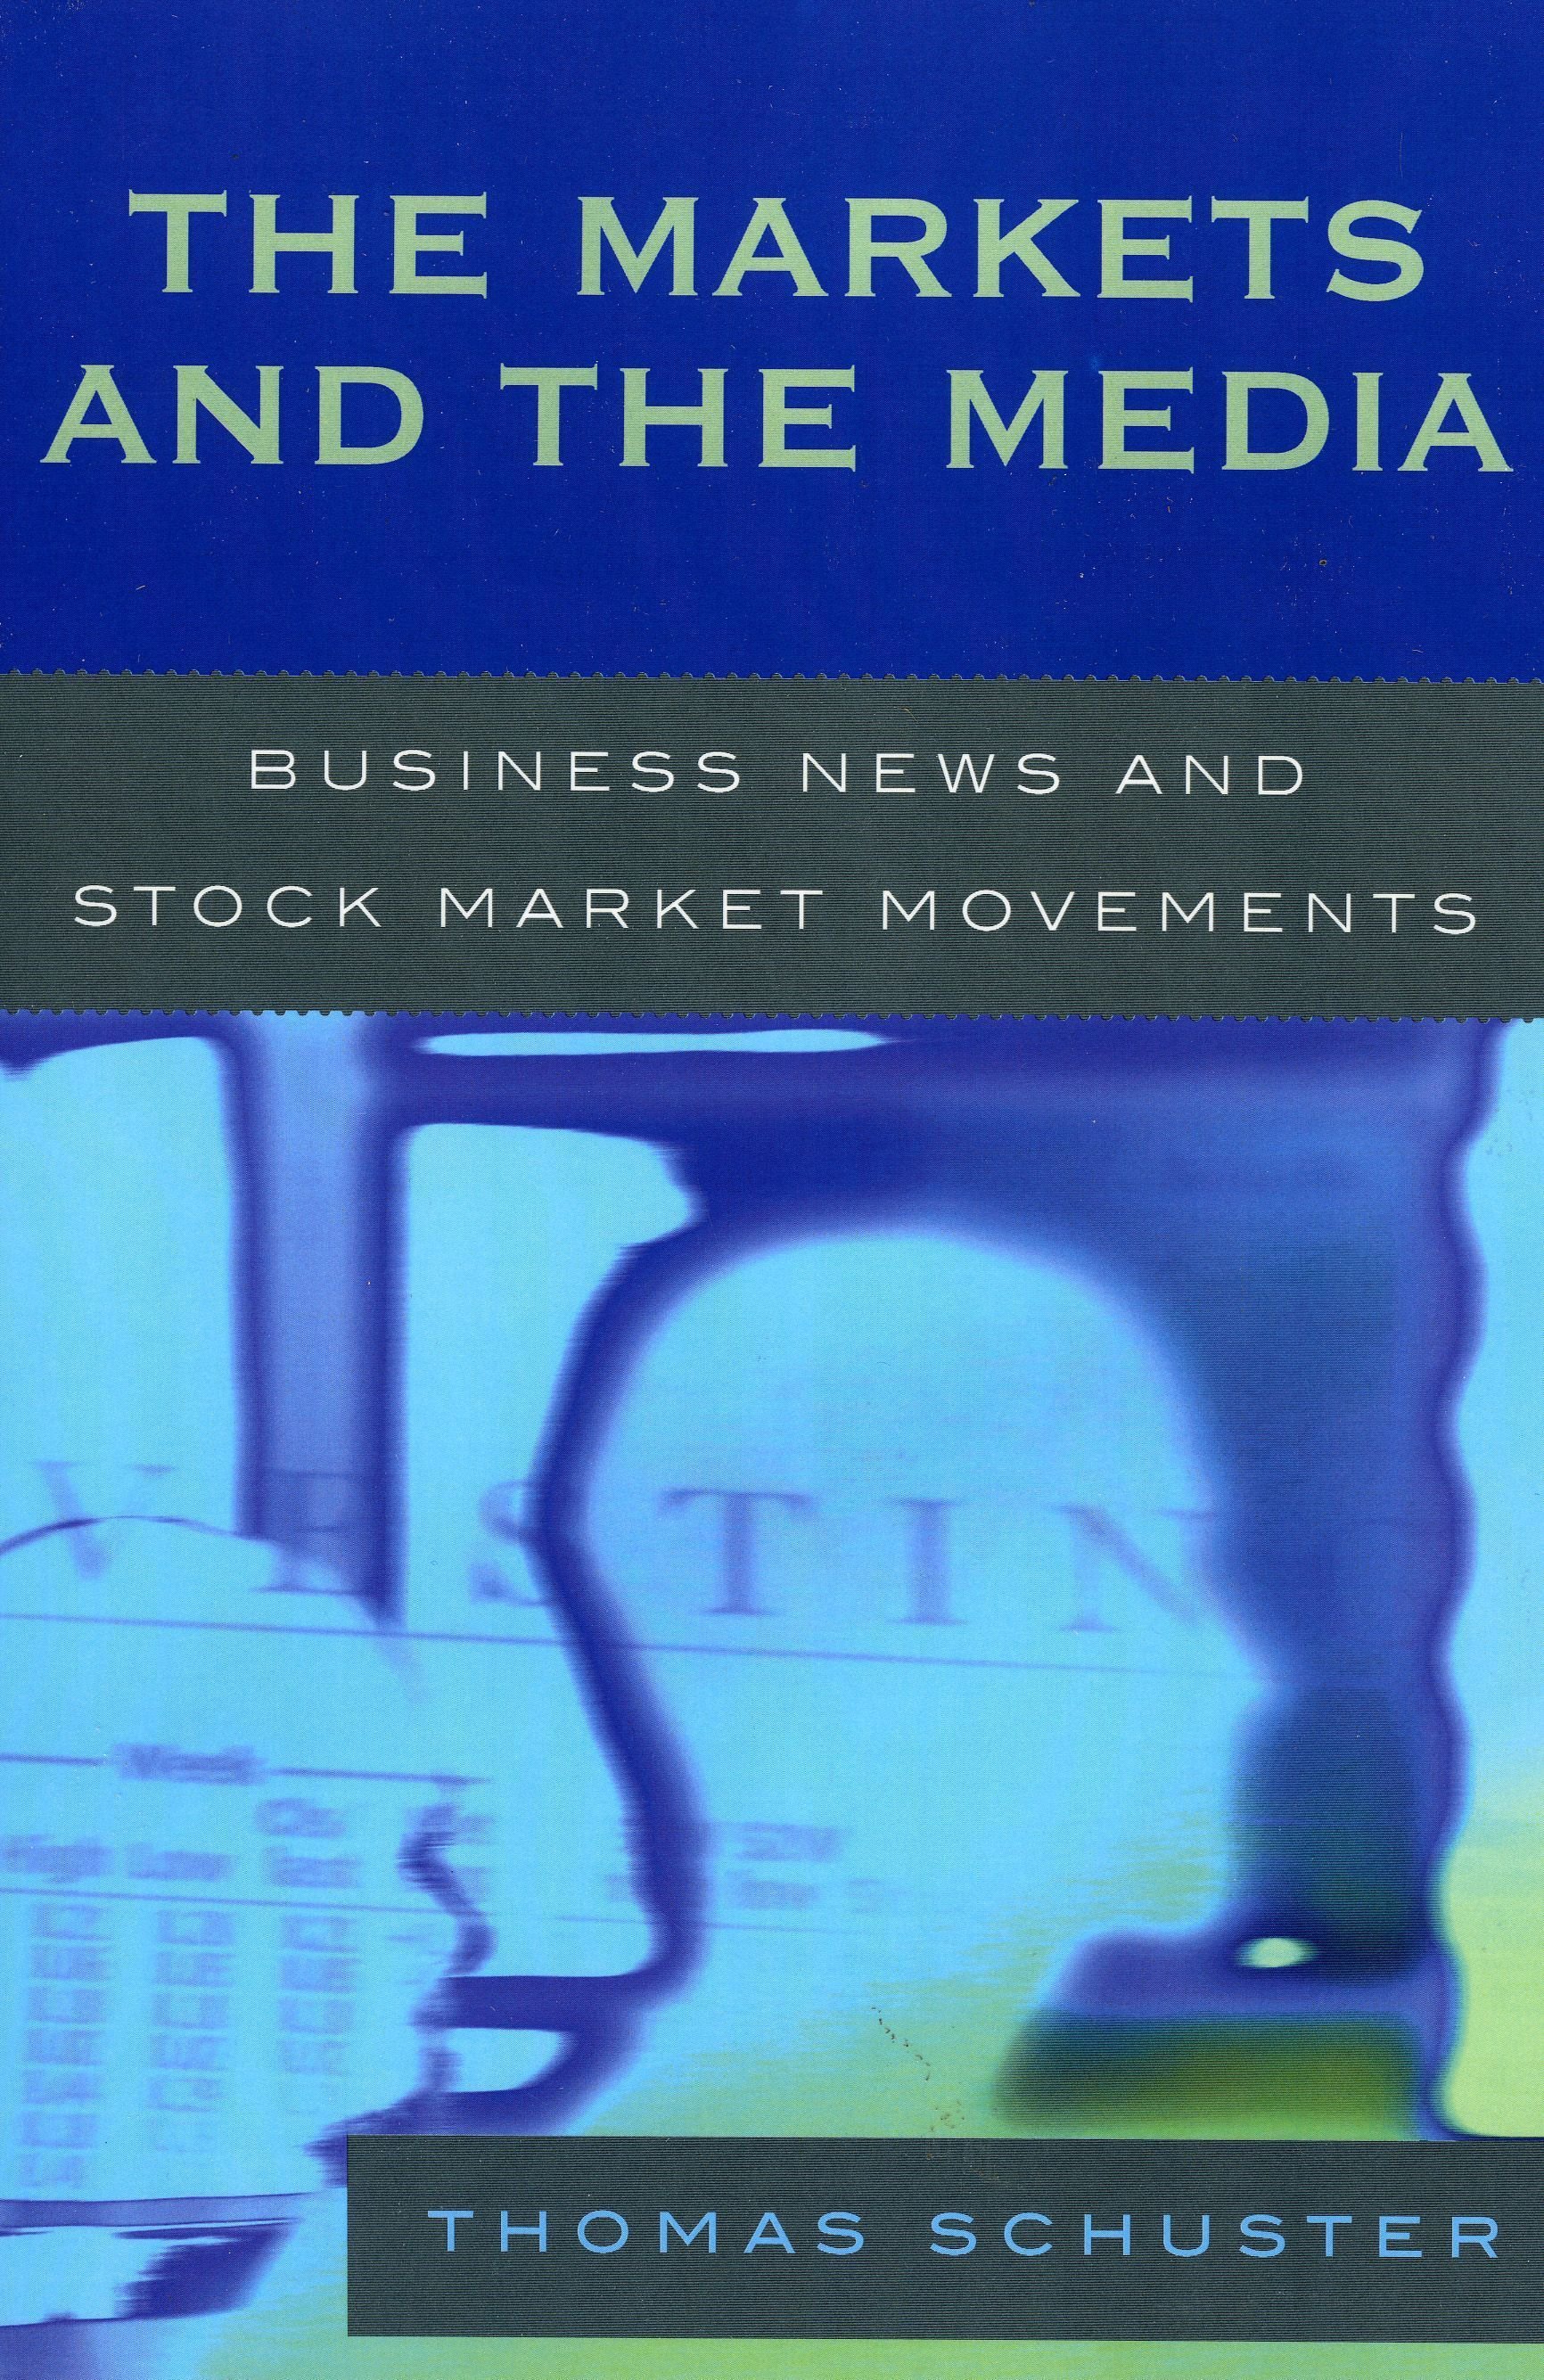 The Markets and the Media